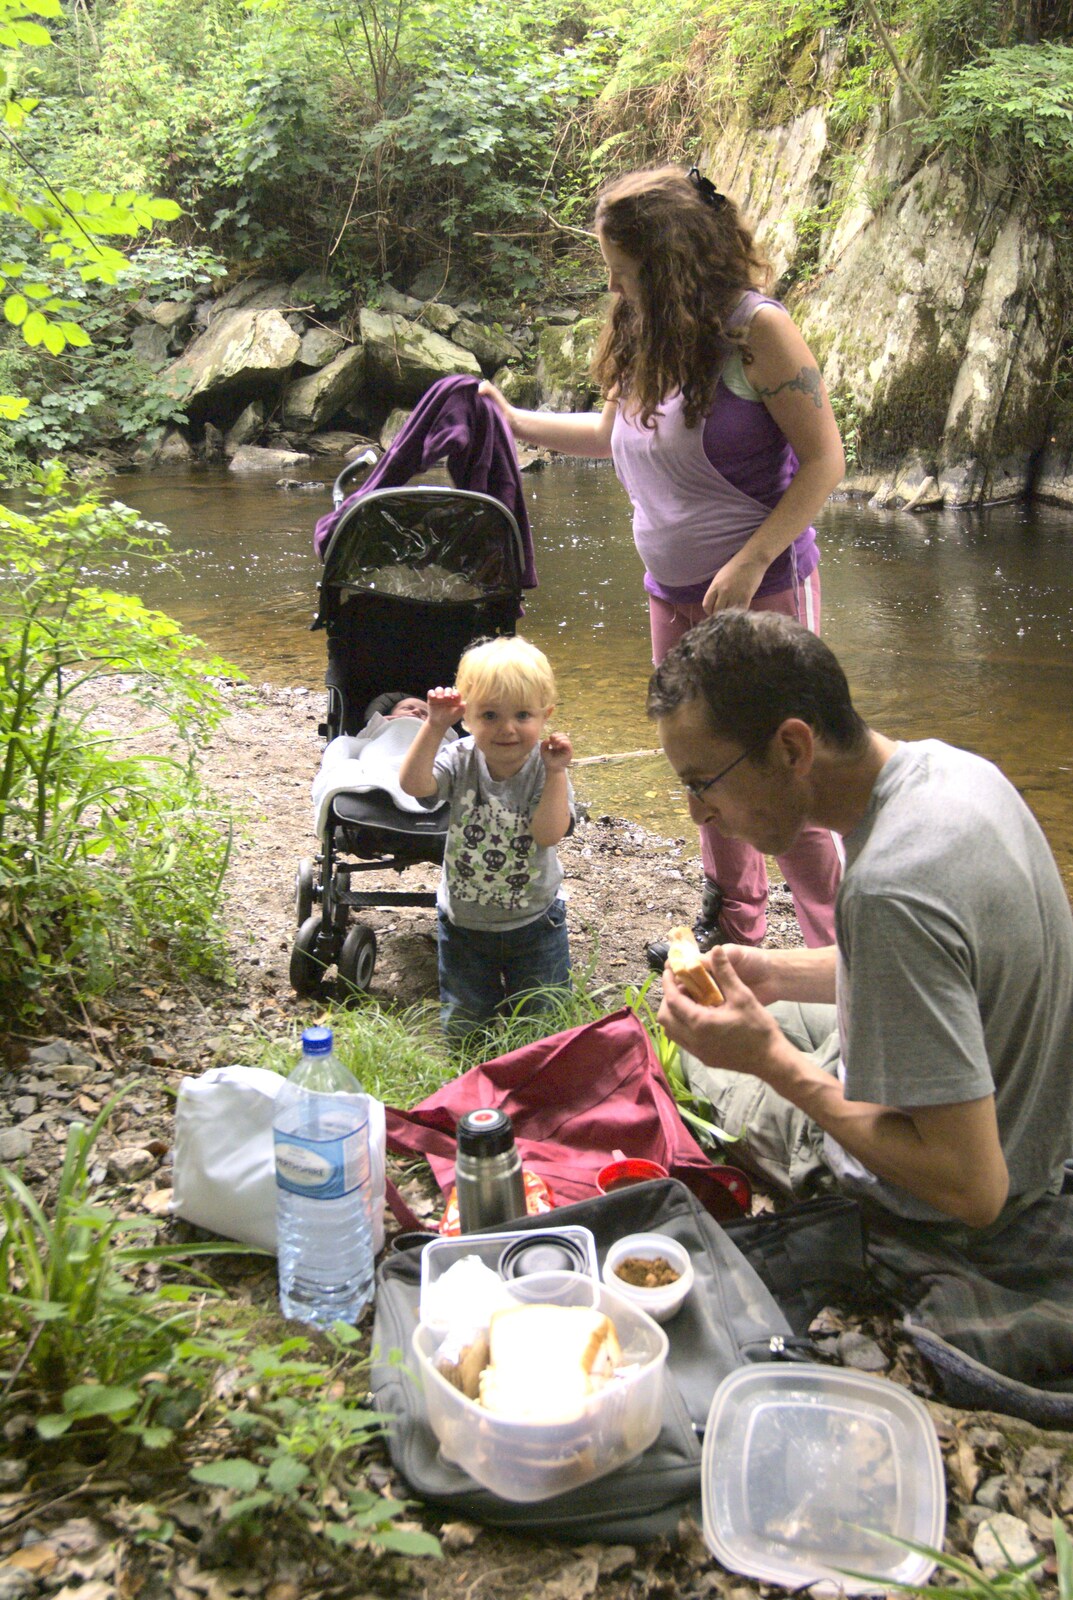 A Walk in Devil's Glen, County Wicklow, Ireland - 31st July 2010: A picnic occurs by the river